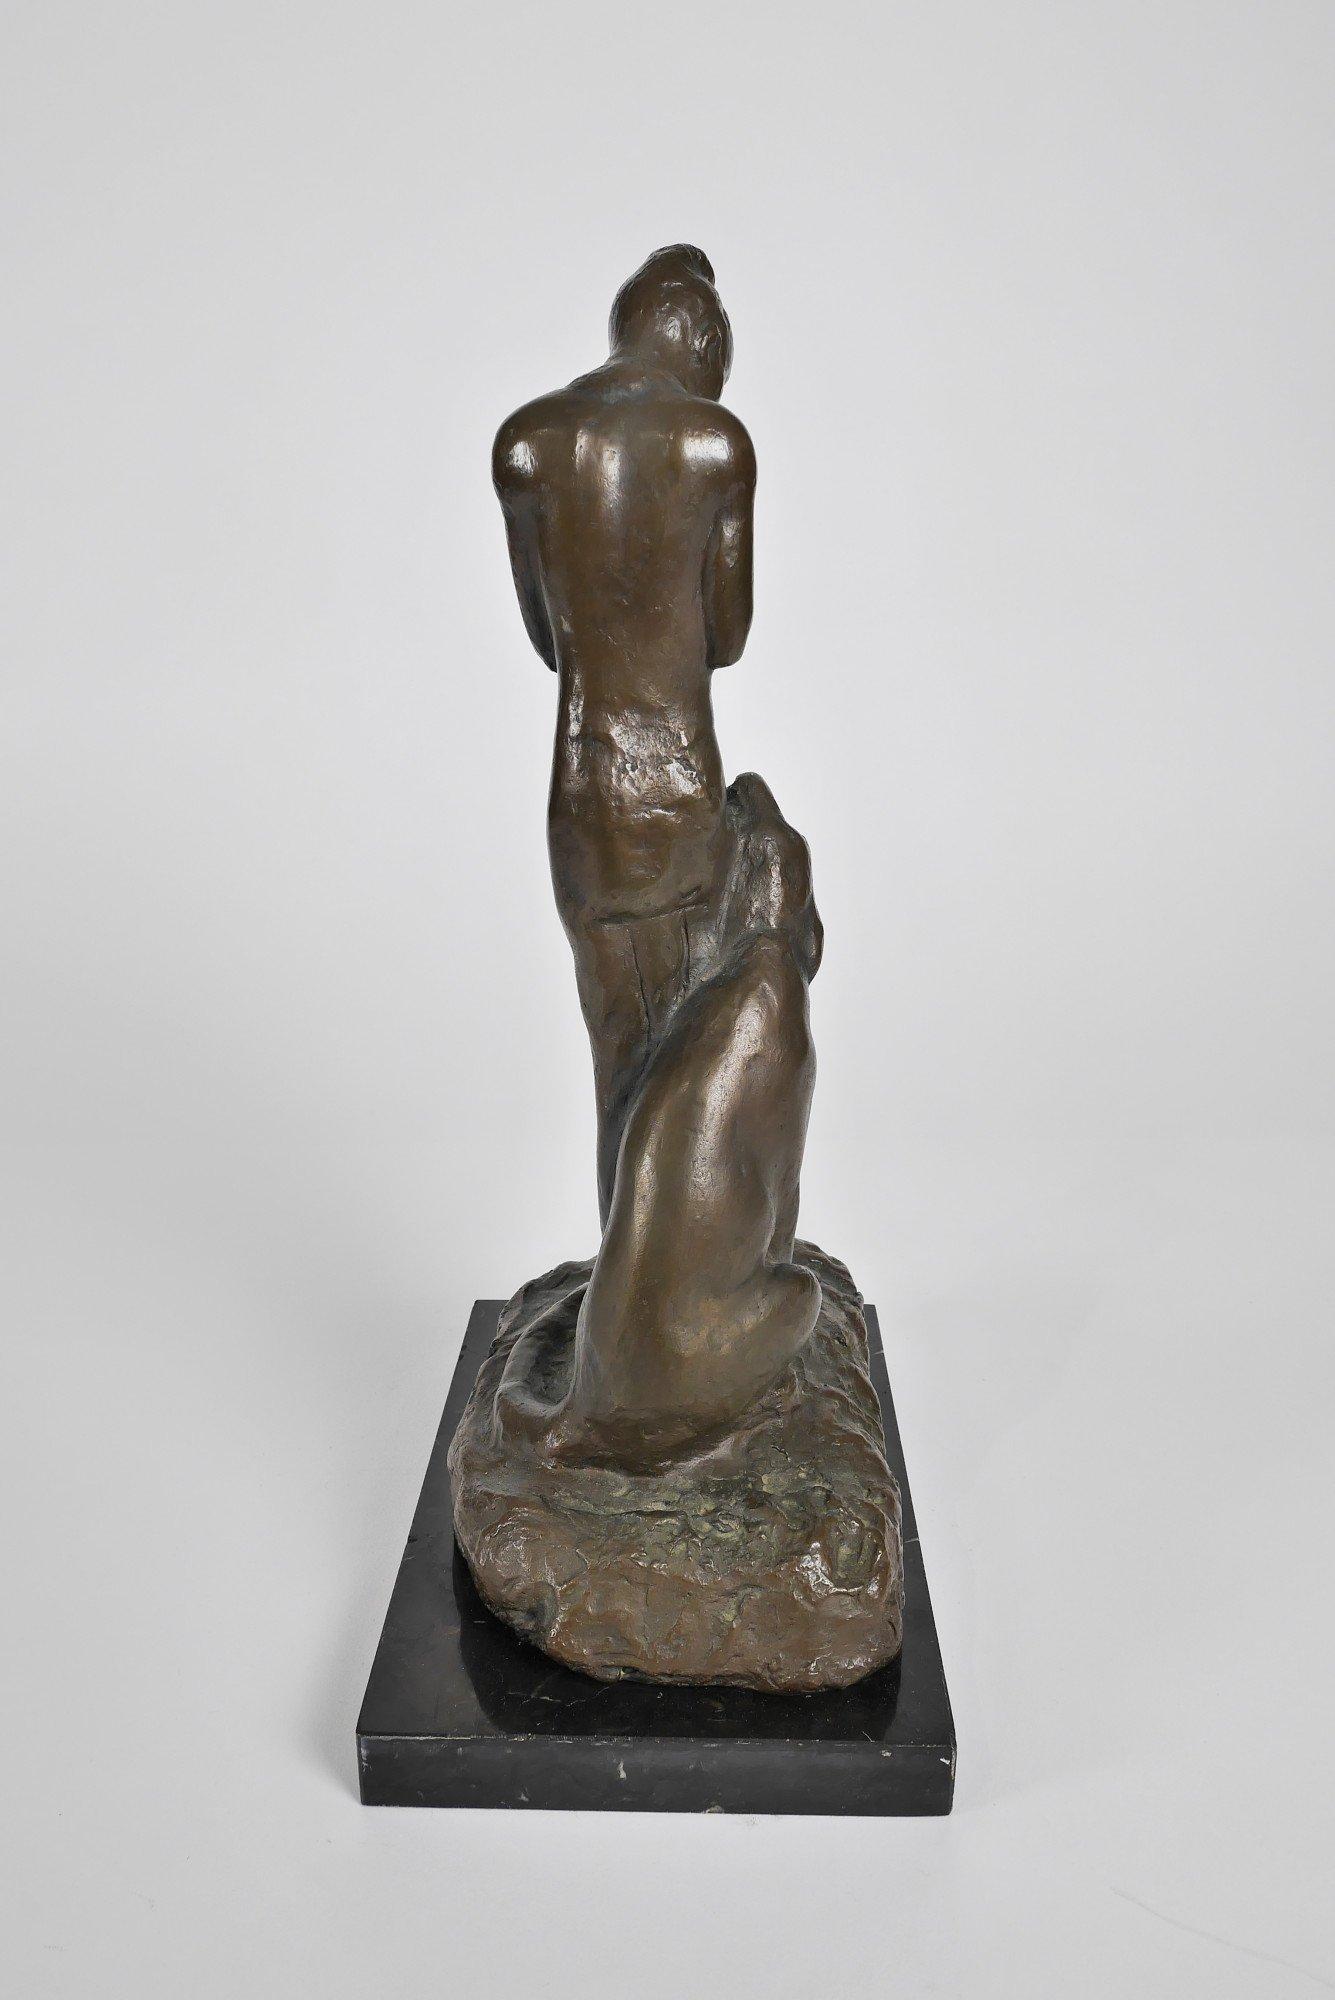 Edwin Willard Deming (American, 1860-1942)
Man with Flute and Cougar
Cast bronze sculpture with golden brown patina 
Signed, numbered 9/100, with Fenn Foundry mark
15 ½ x 9 x 6 inches including marble base. 

Born in Ashland, Ohio, Edwin Deming was